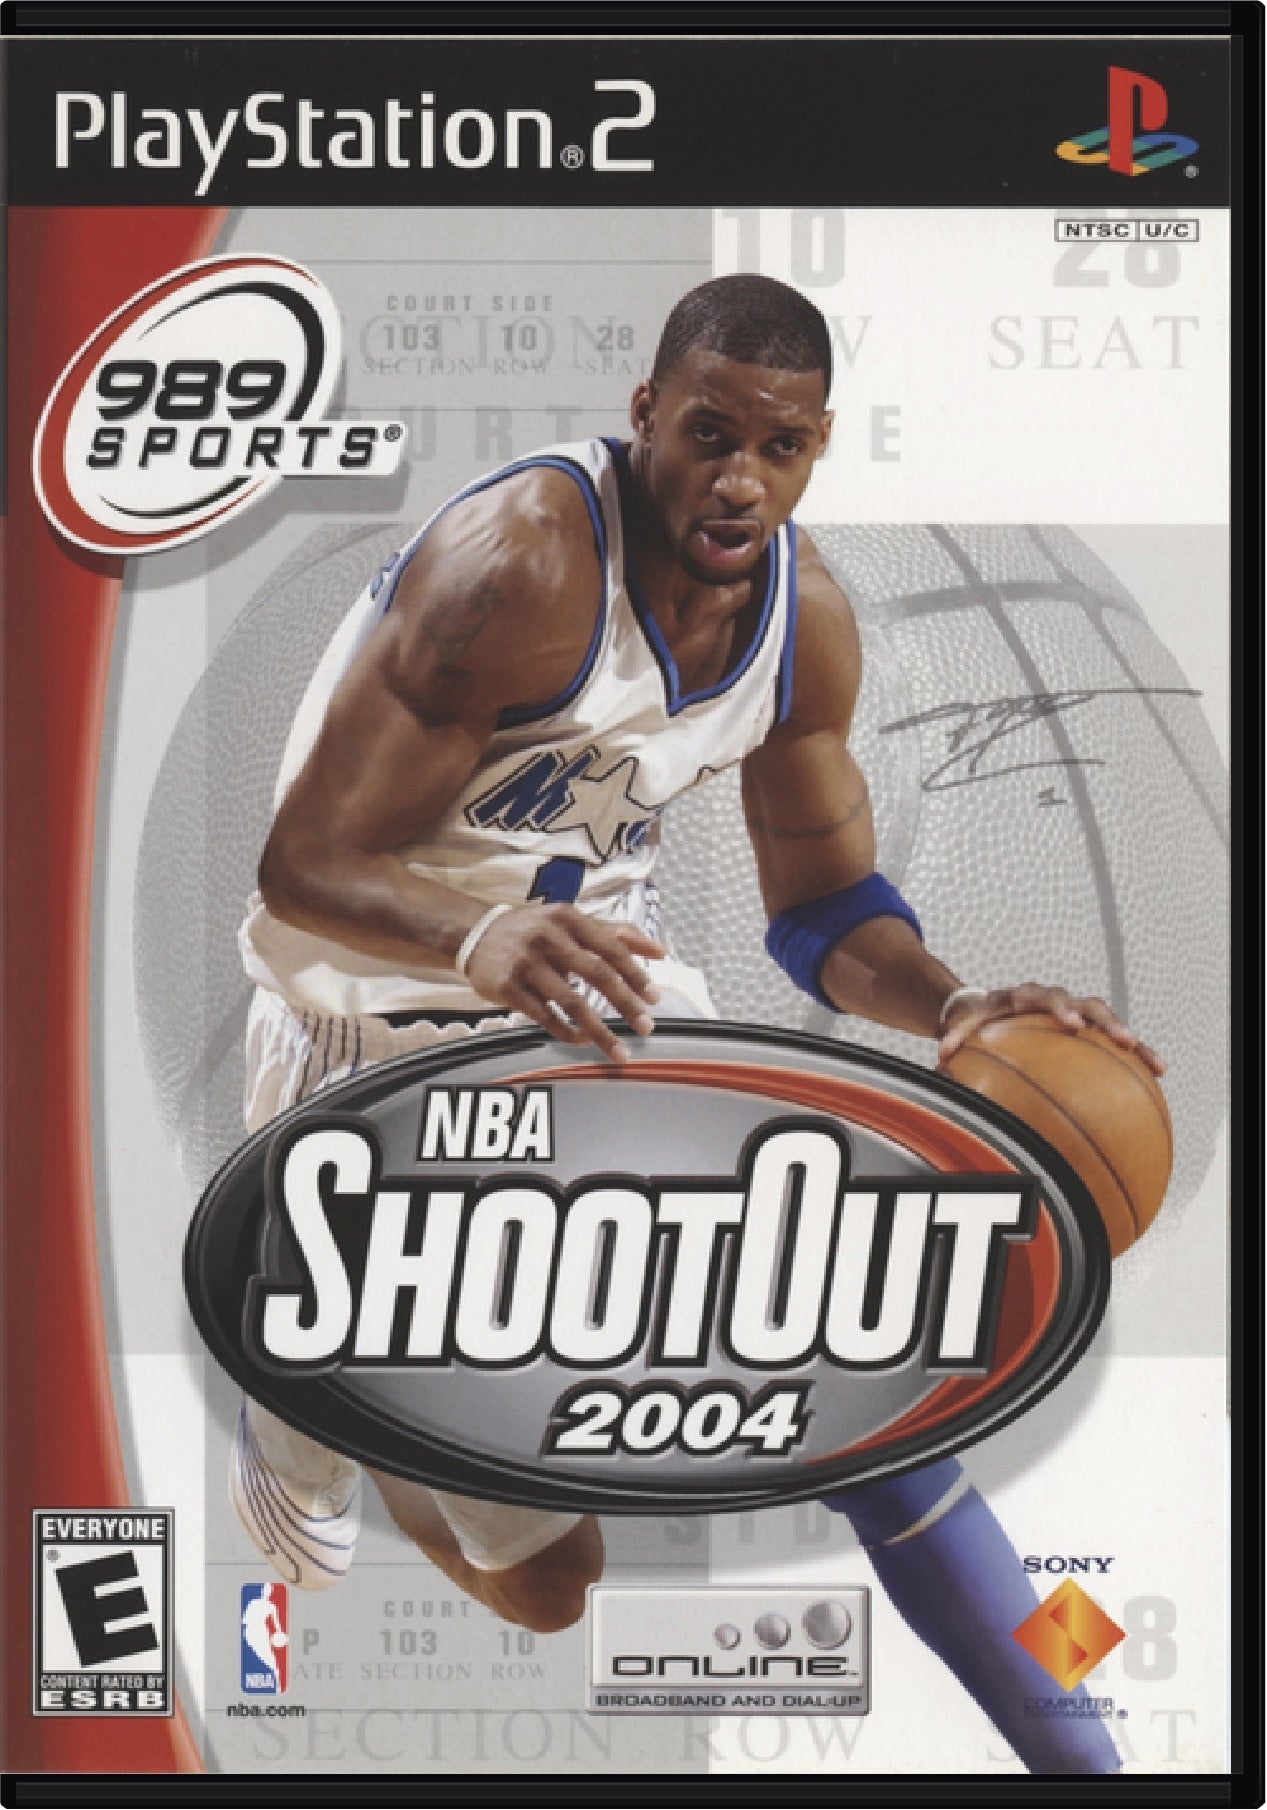 NBA Shootout 2004 Cover Art and Product Photo